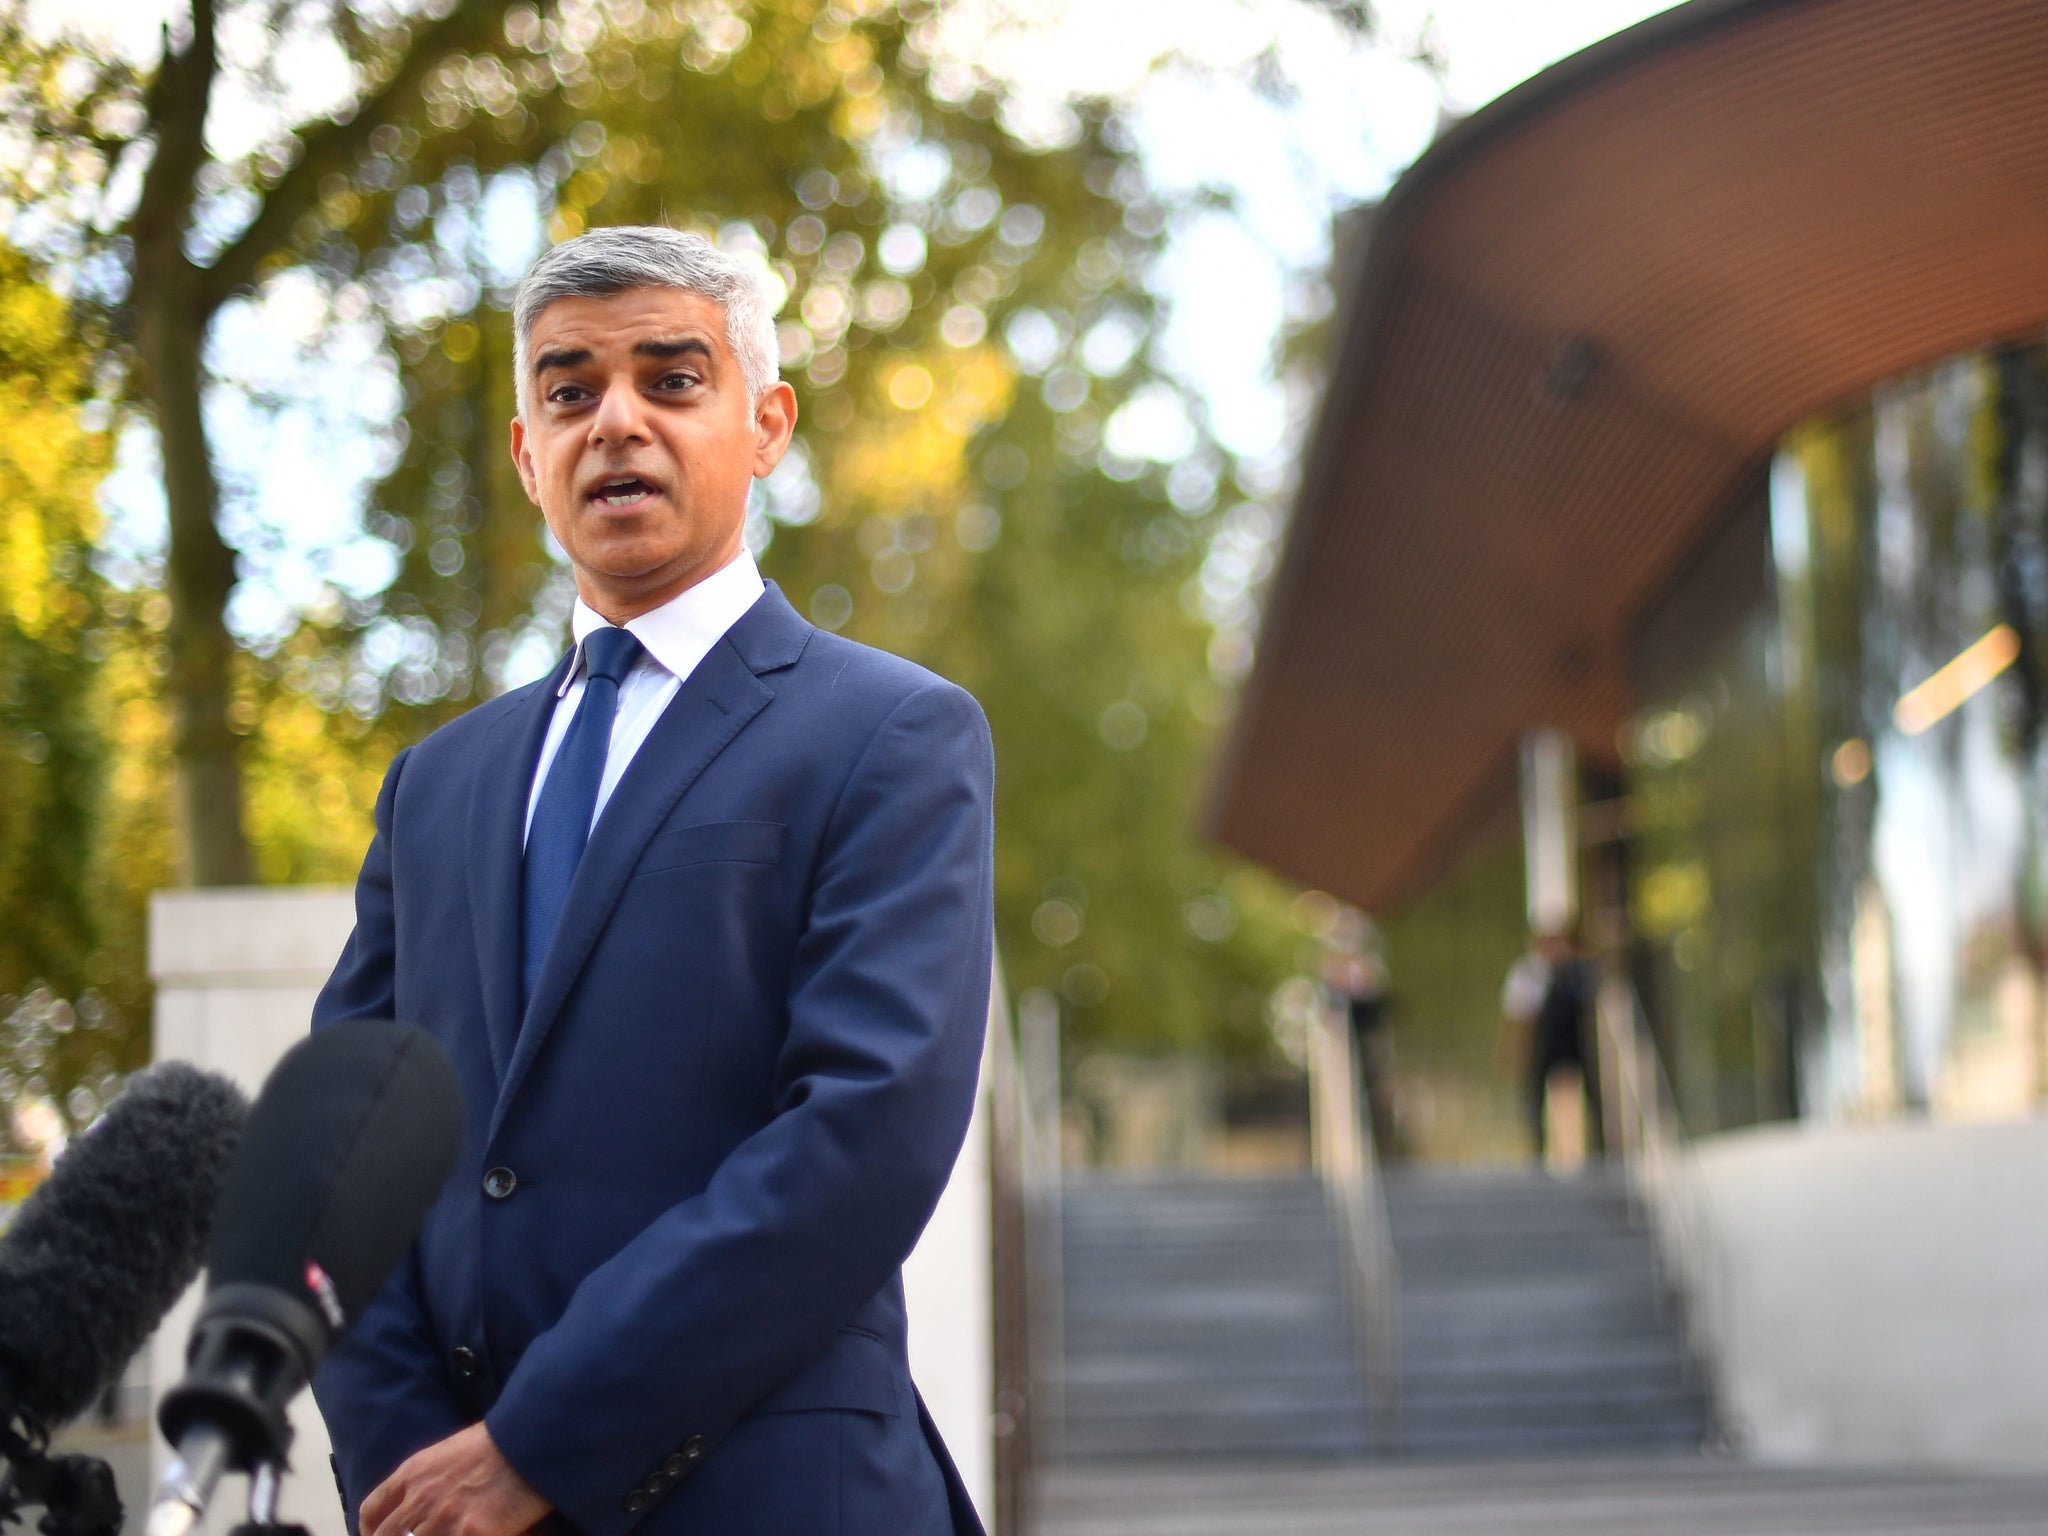 London mayor Sadiq Khan is at war with the prime minister over calls for fare hikes and an extension of the congestion zone